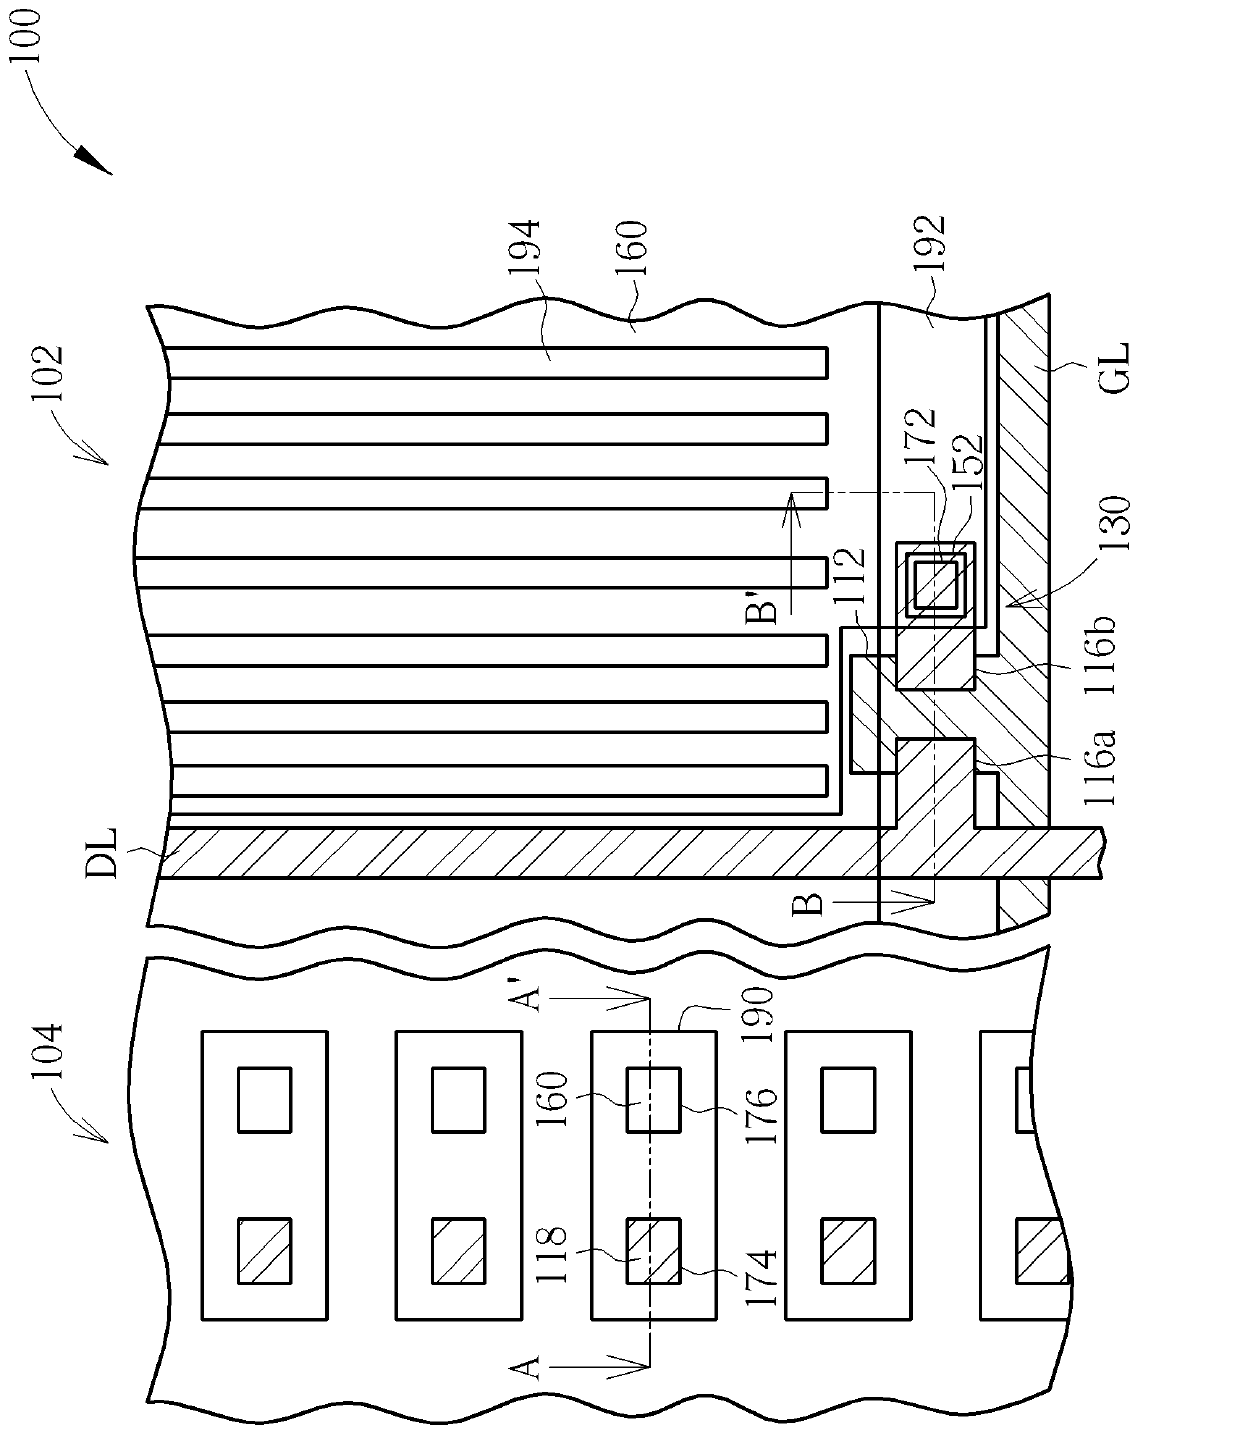 An array substrate of a display panel and a manufacture method thereof